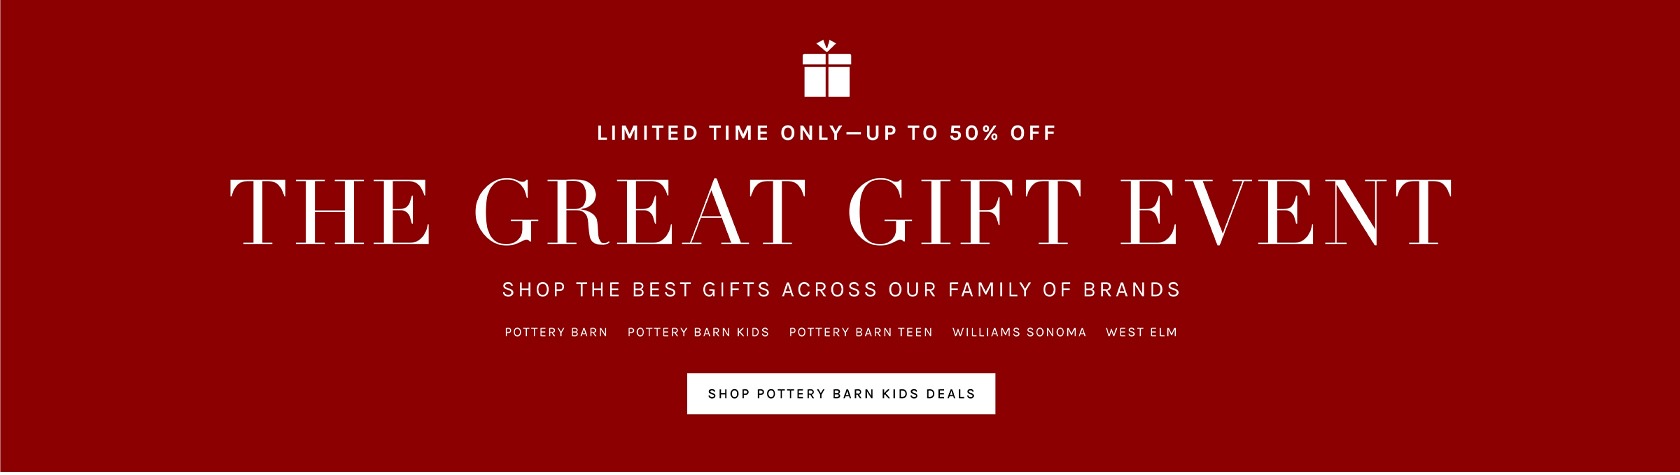 Up to 50% Off Great Gift Event